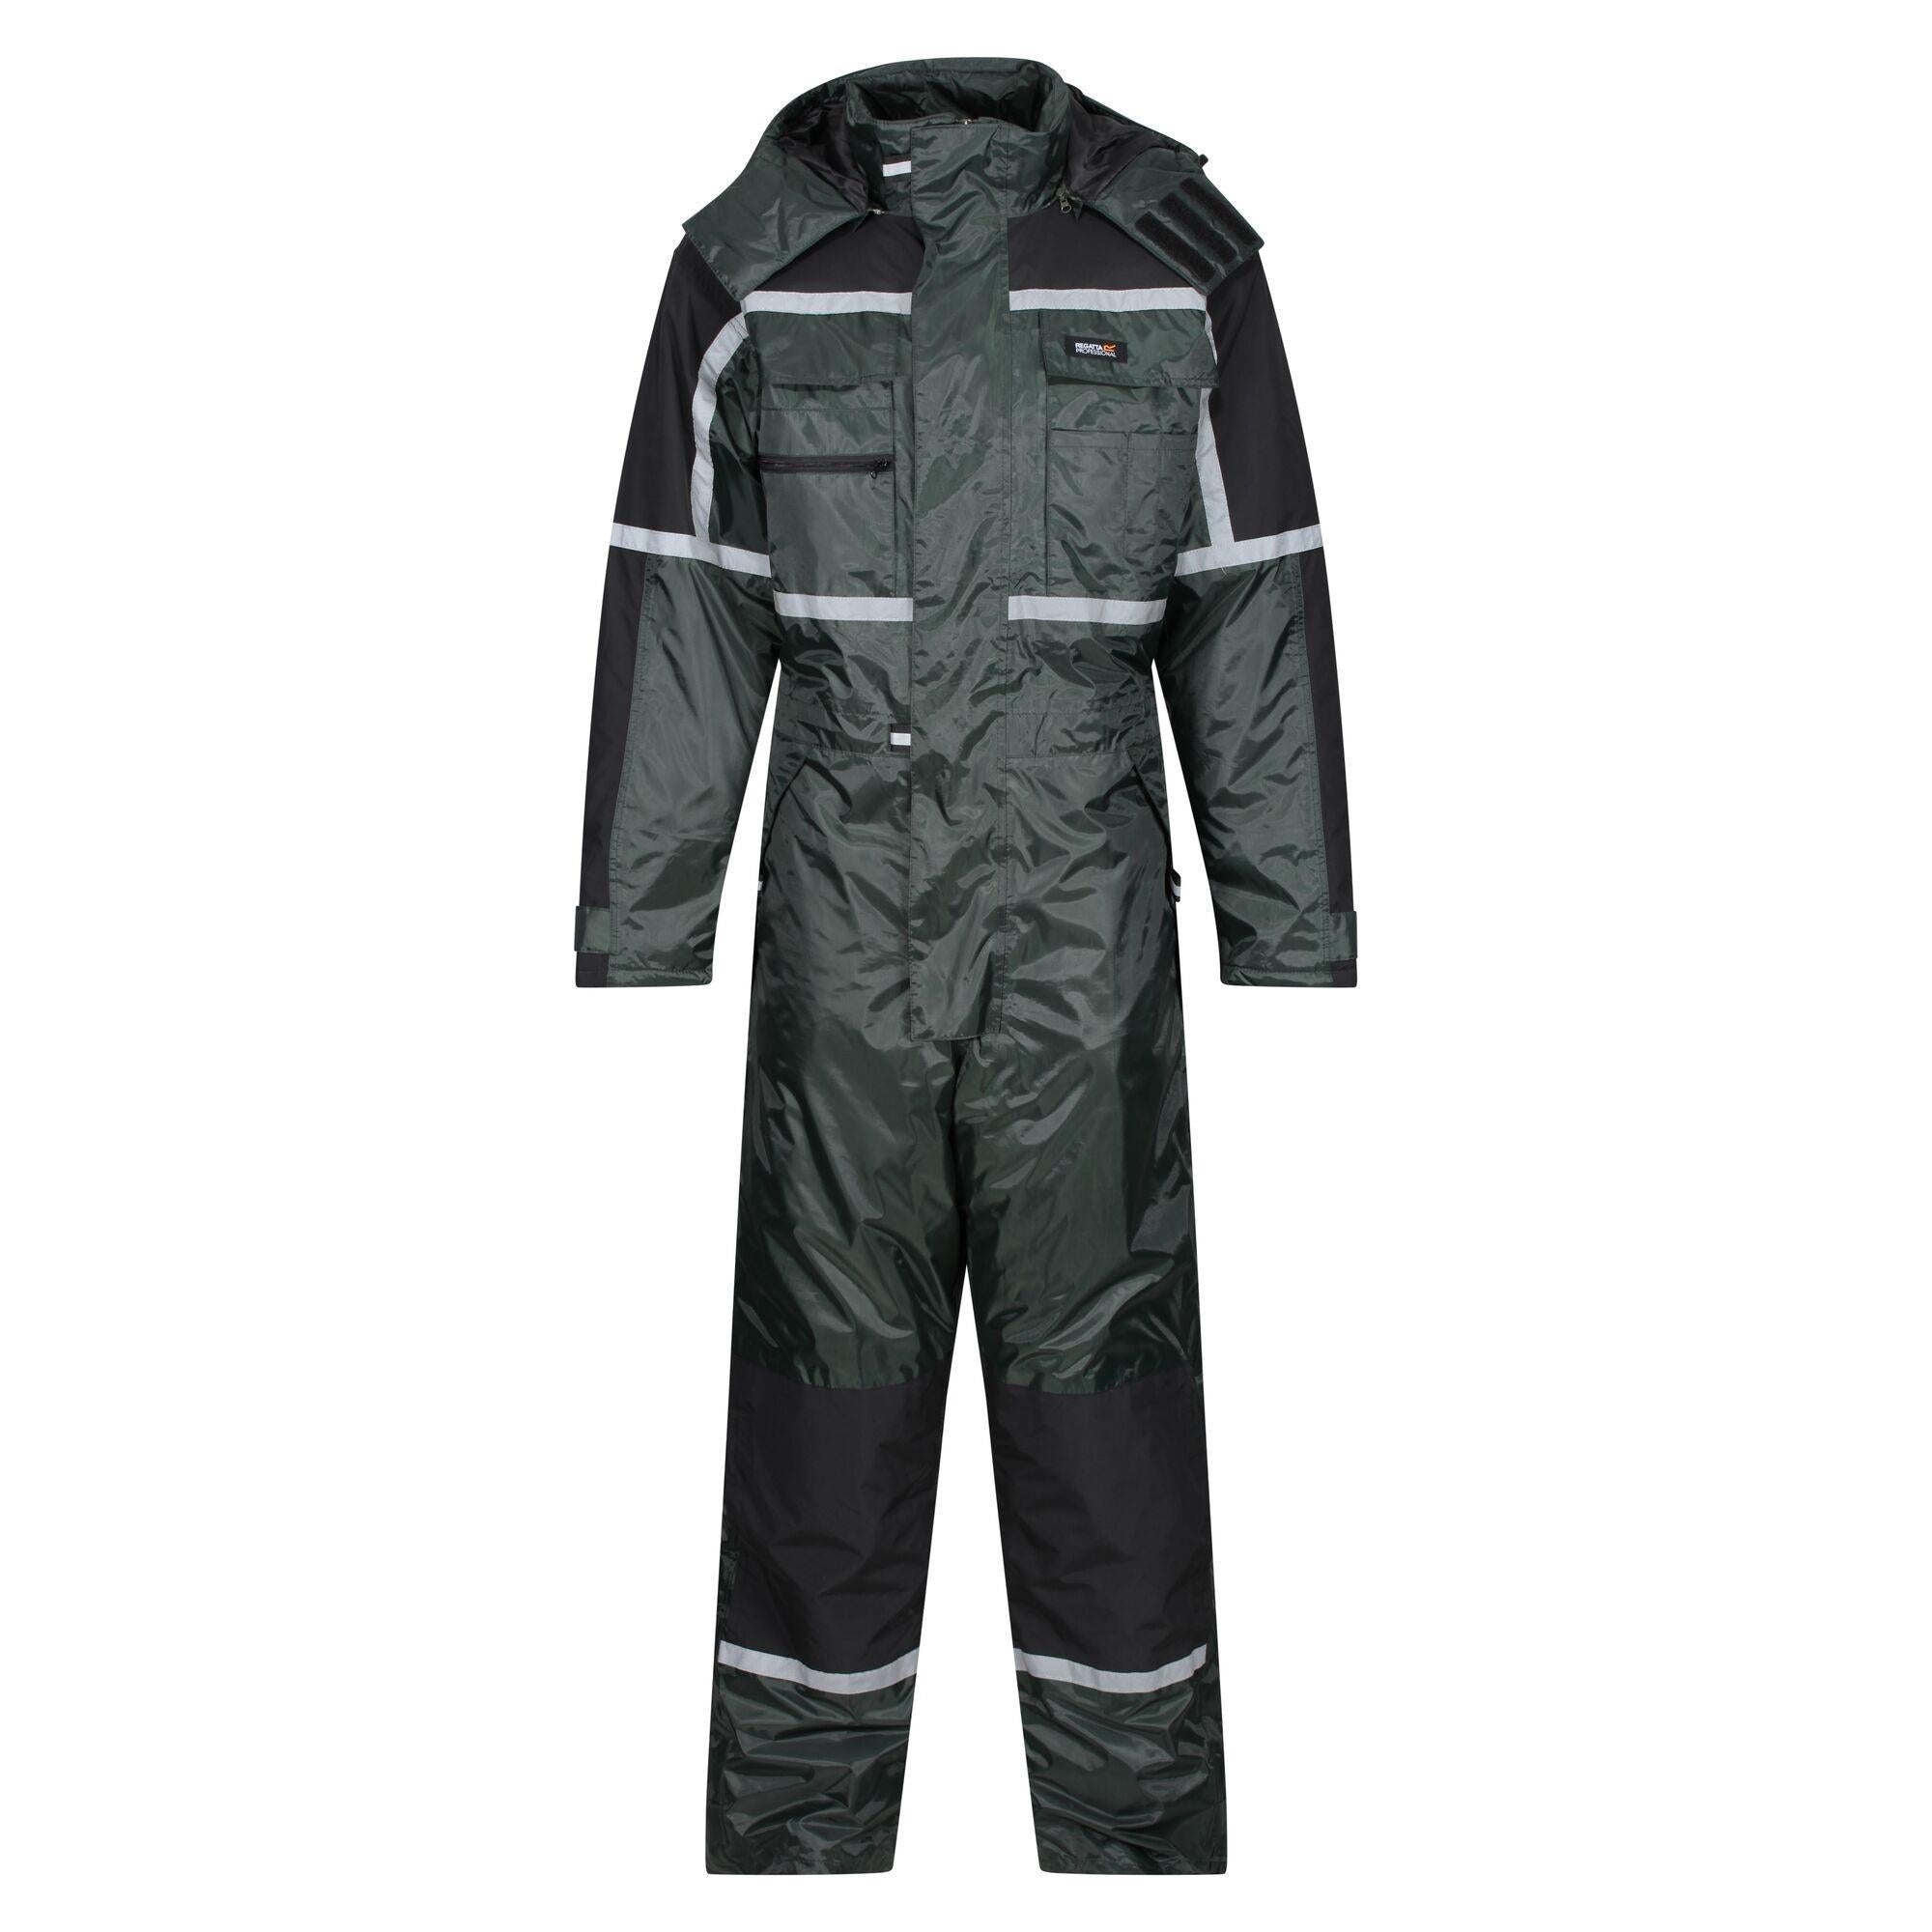 Regatta Pro olive men's waterproof insulated padded winter coverall #TRA225